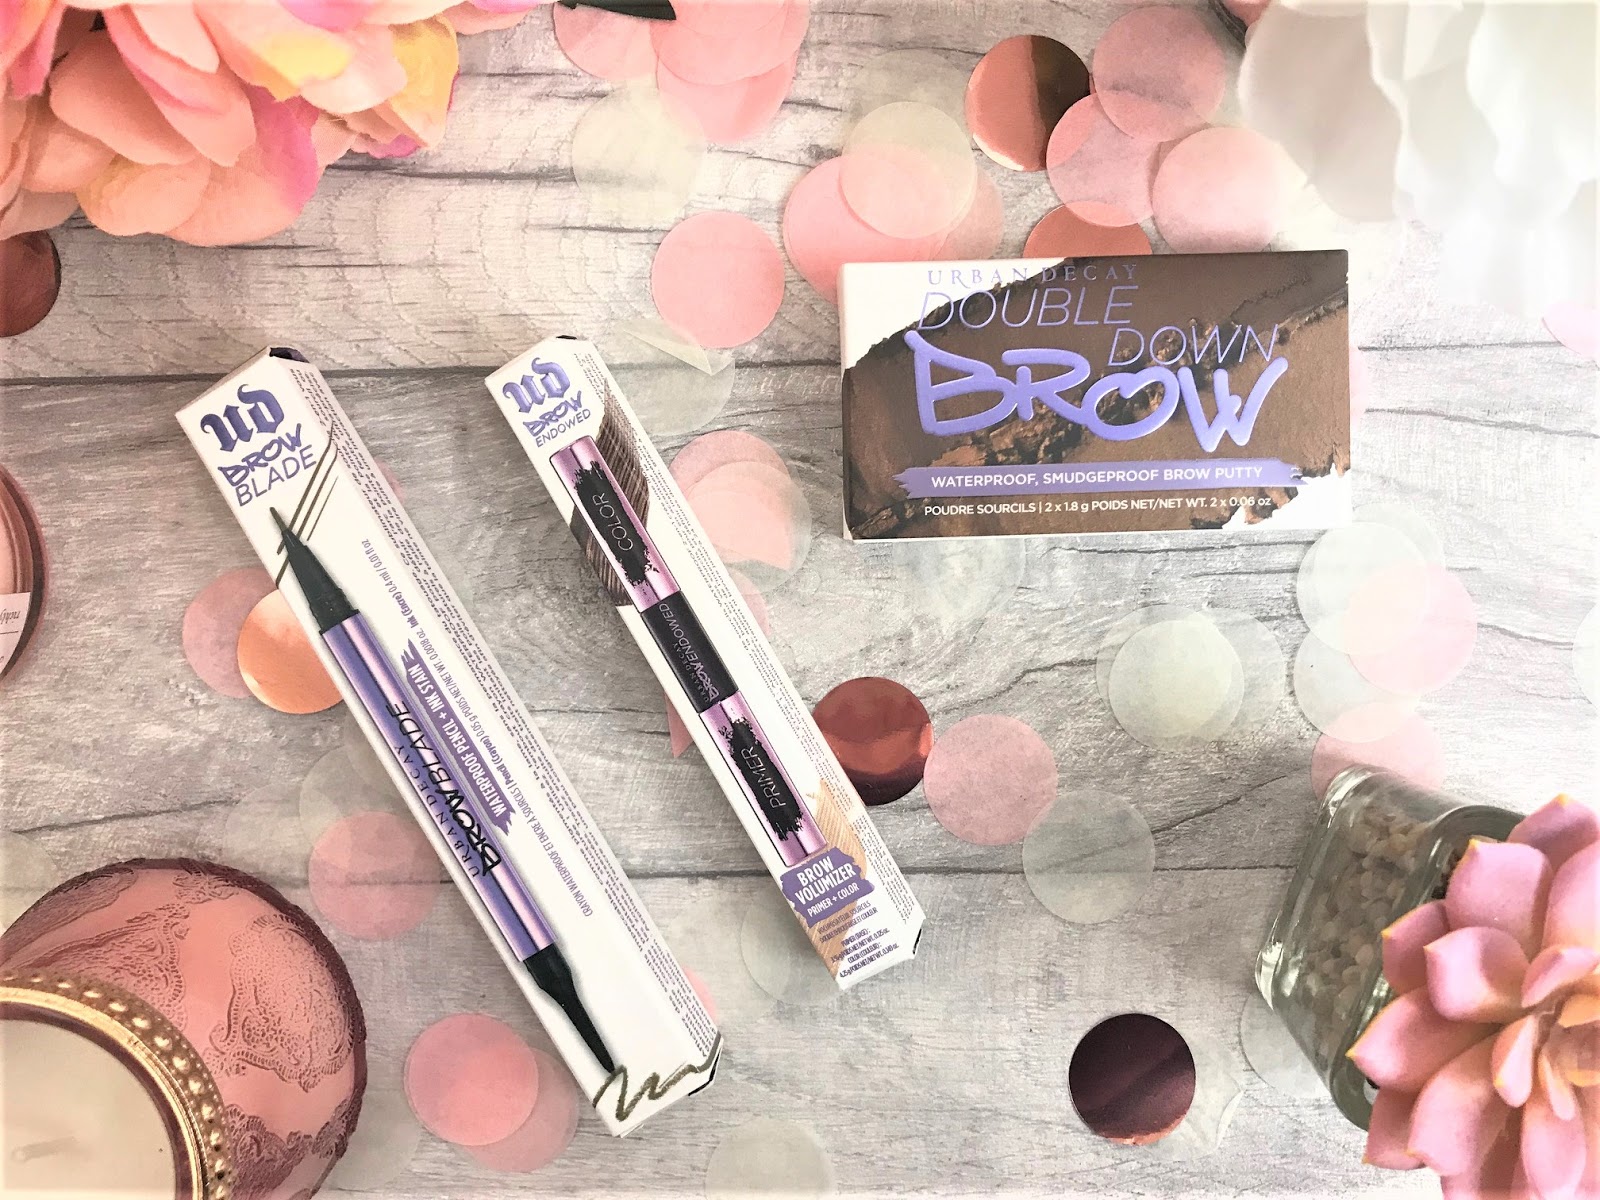 Urban Decay Brow Blade Waterproof Eyebrow Pencil & Ink Stain Cafe Kitty